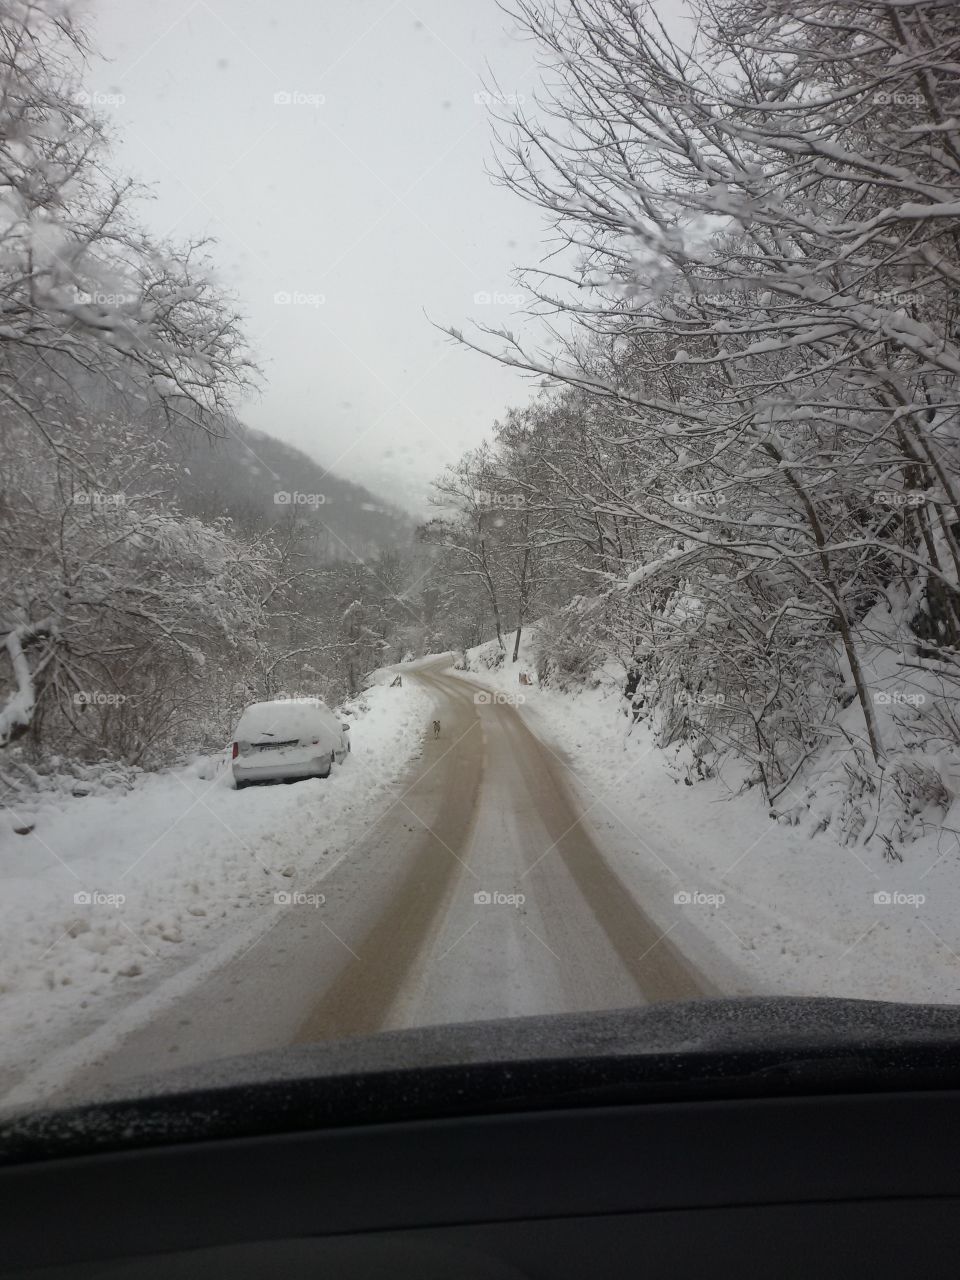 Winter road covered with snow